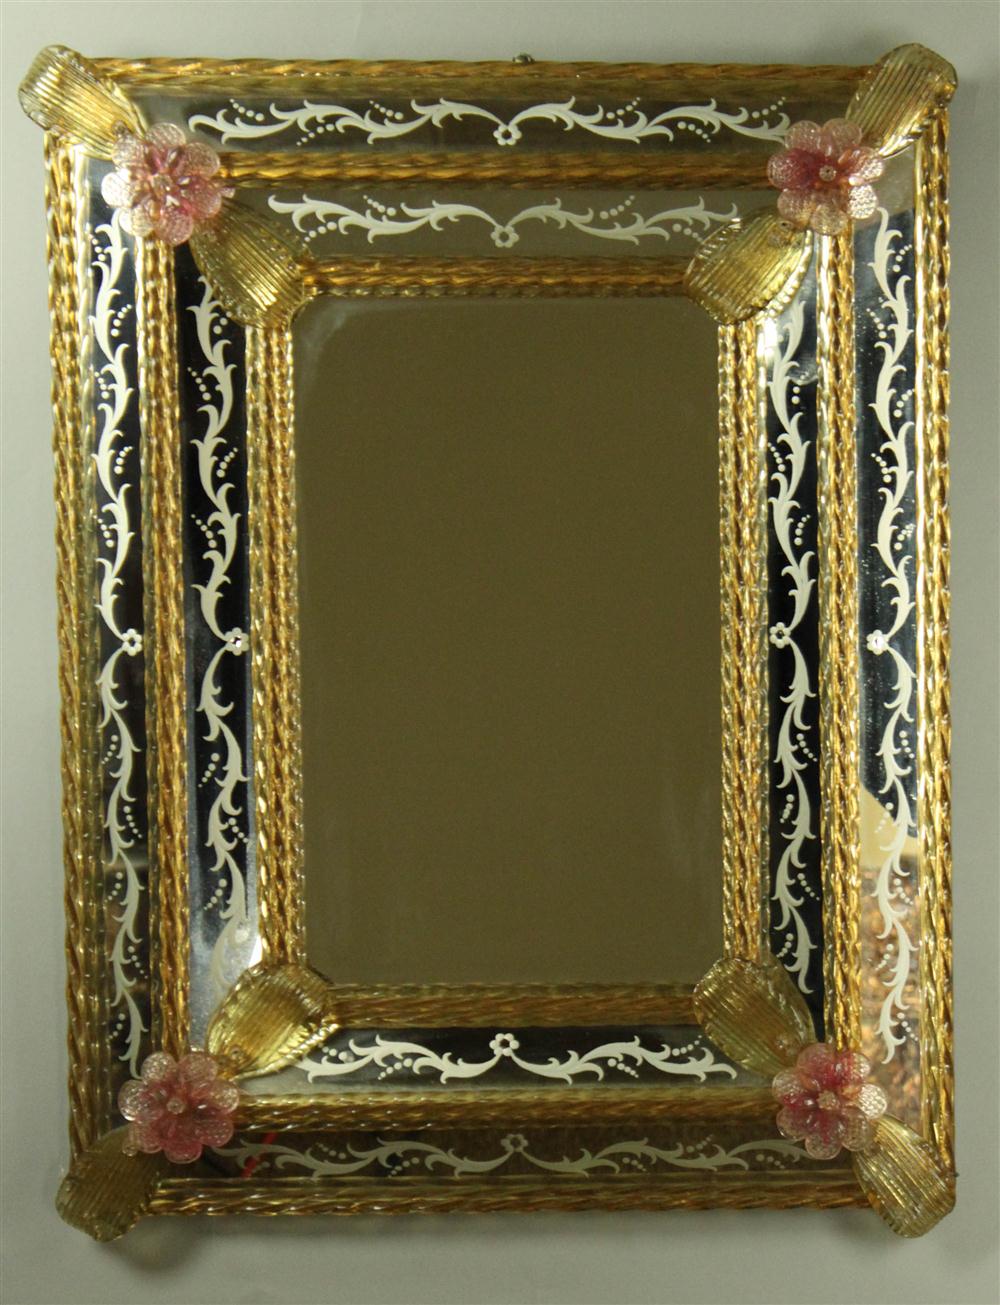 VENETIAN STYLE GLASS MIRROR of 145a0d